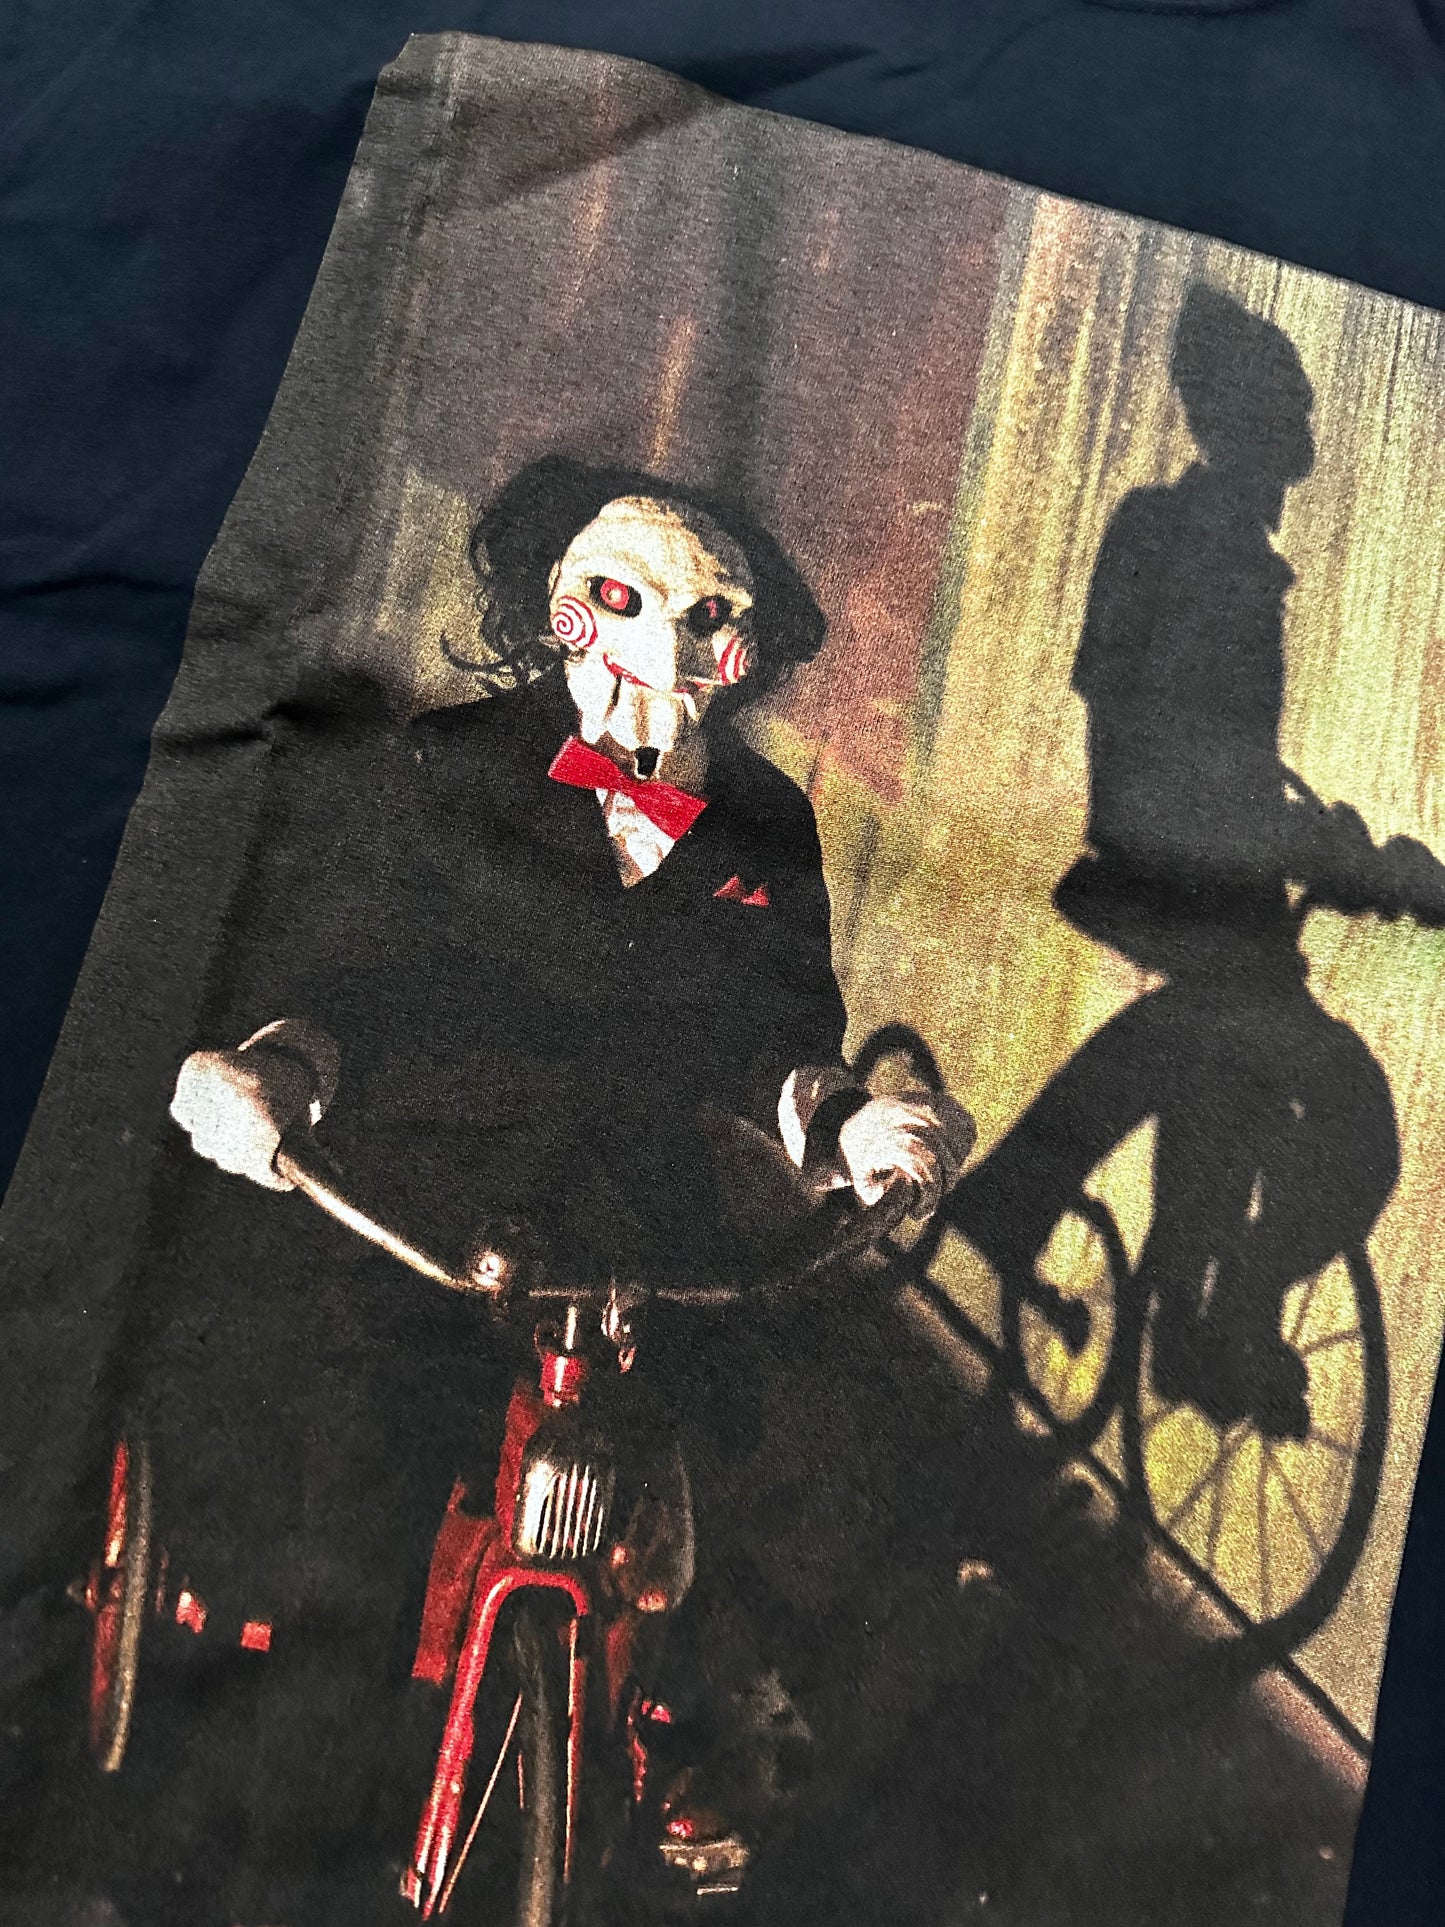 Diamond Supply x Saw:Spiral “Billy the puppet”